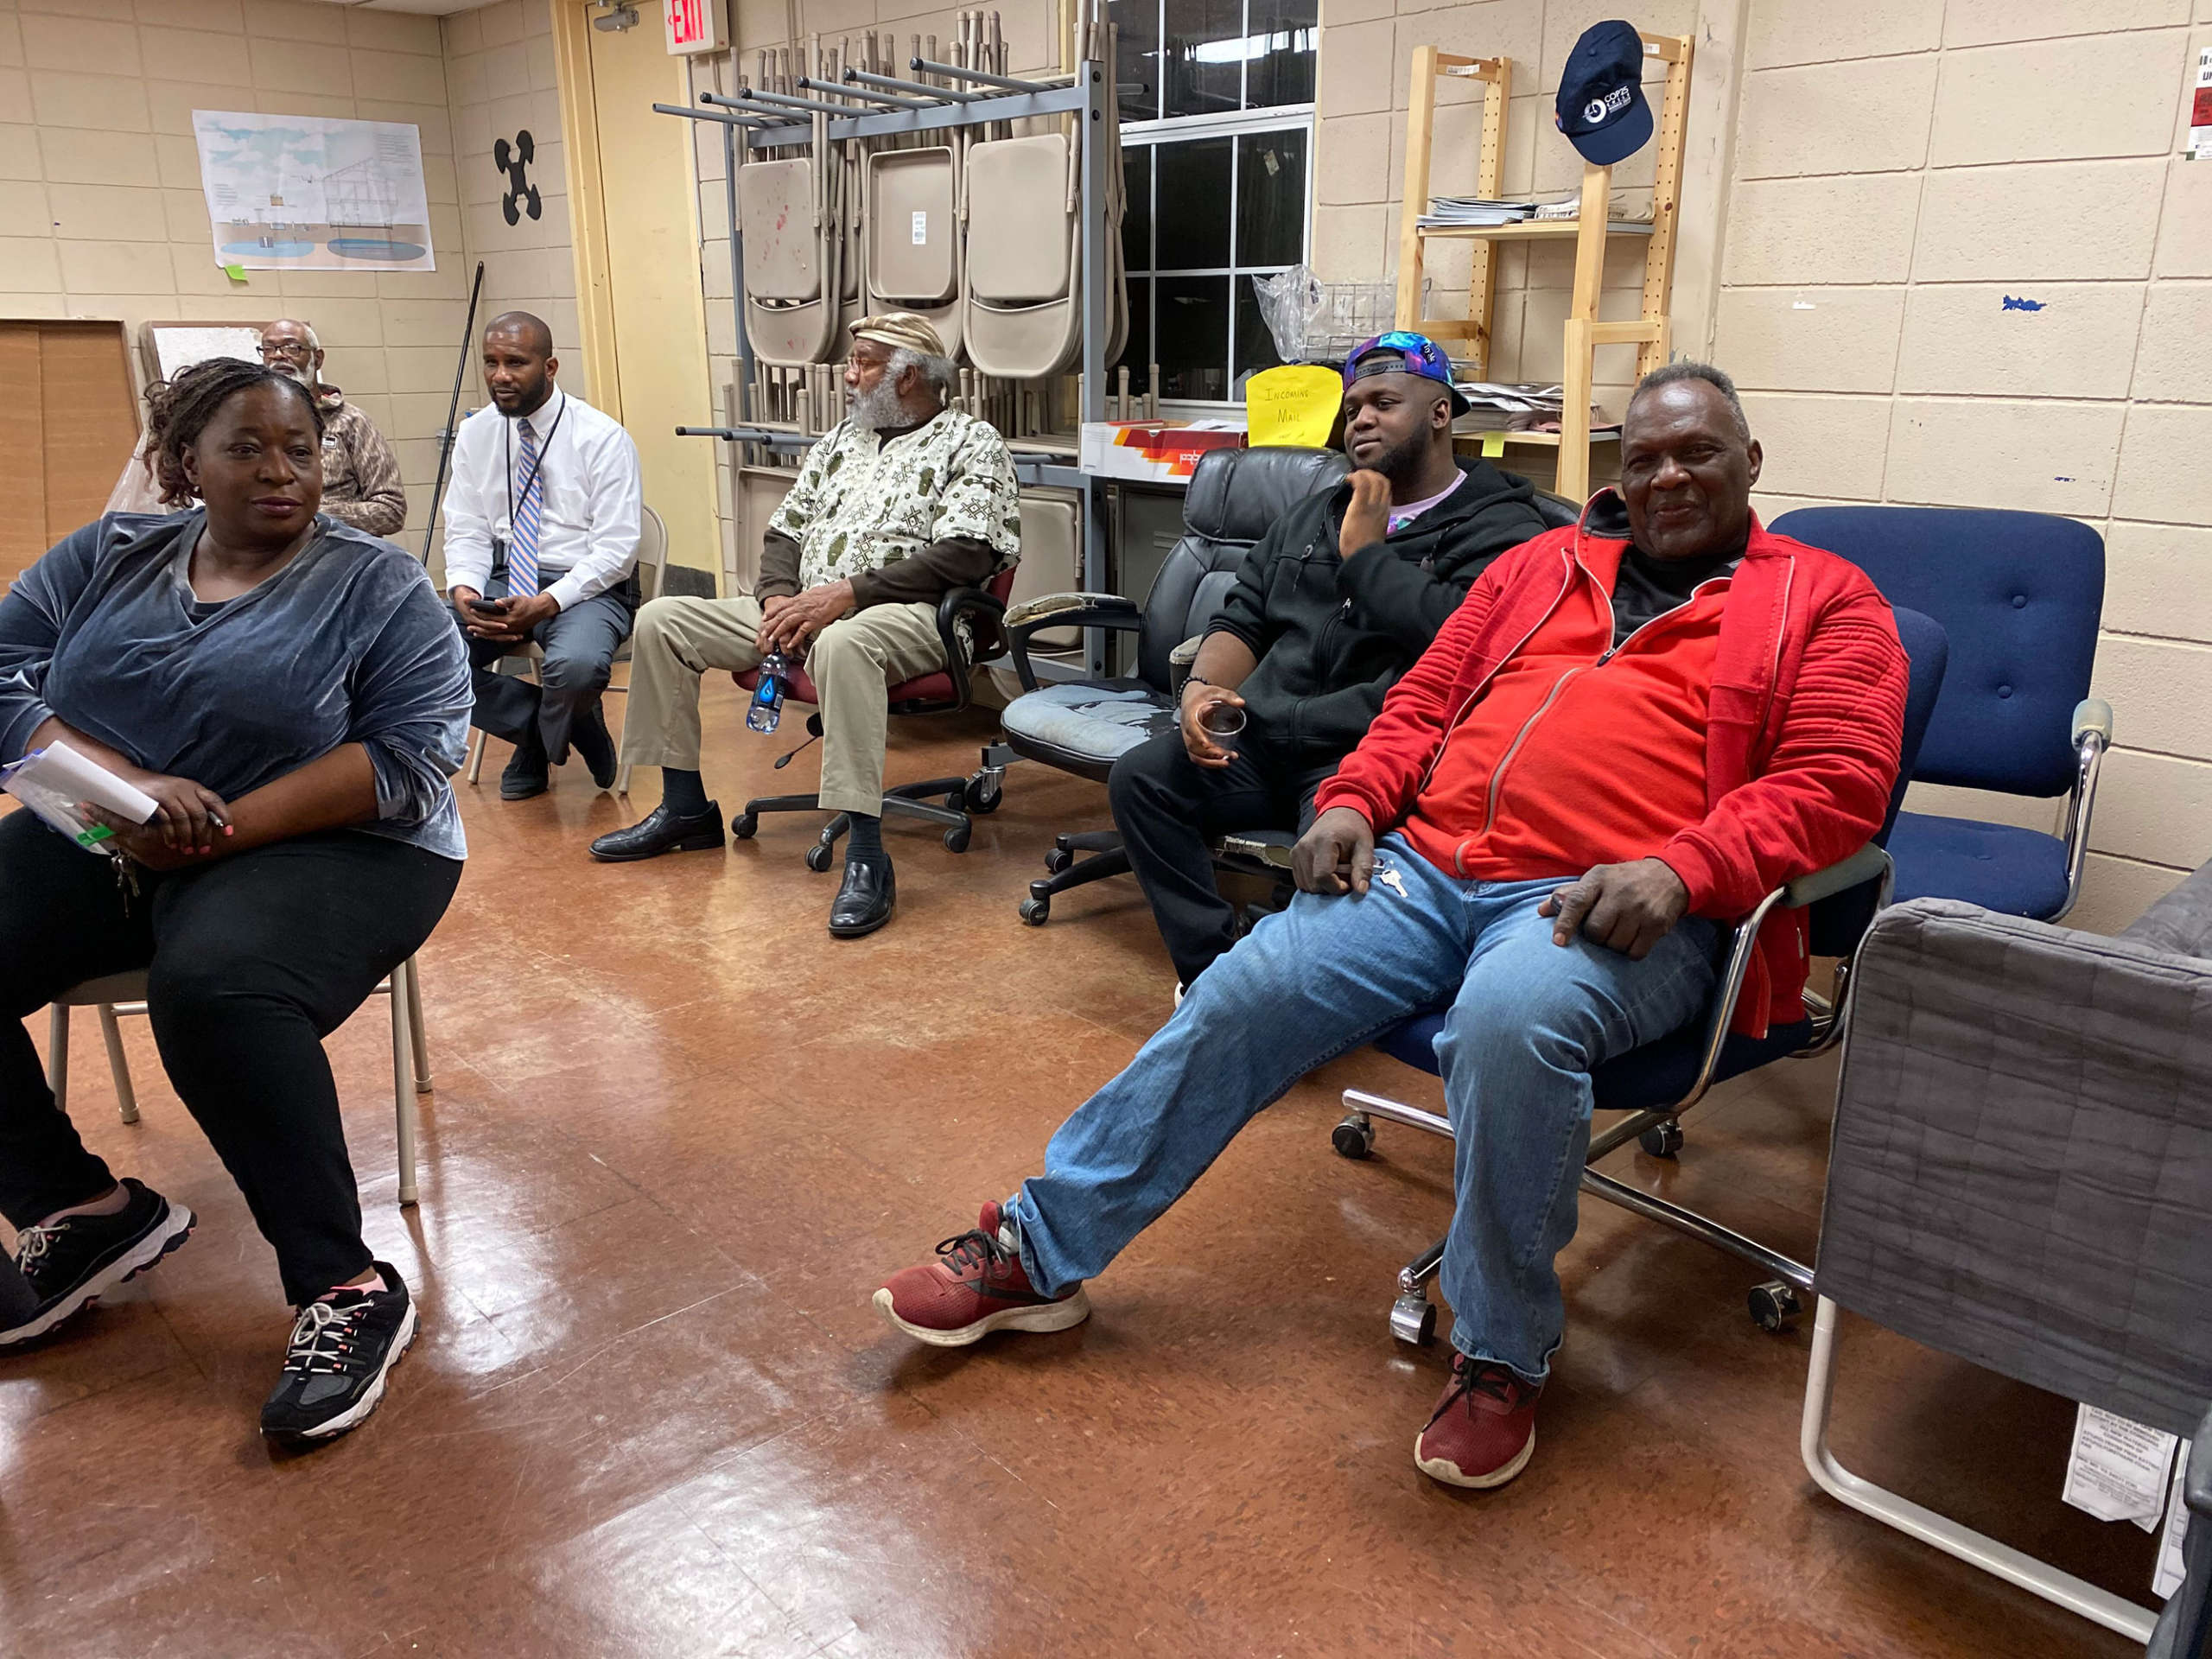 Several members of the Poindexter Park Neighborhood Association and two of the tenants of the Ida B. Wells Plaza consider possibilities for revitalization of the plaza at the Emergency Meeting held on February 27, 2020, at the Kuwasi Balagoon Center for Economic Democracy and Sustainable Development.